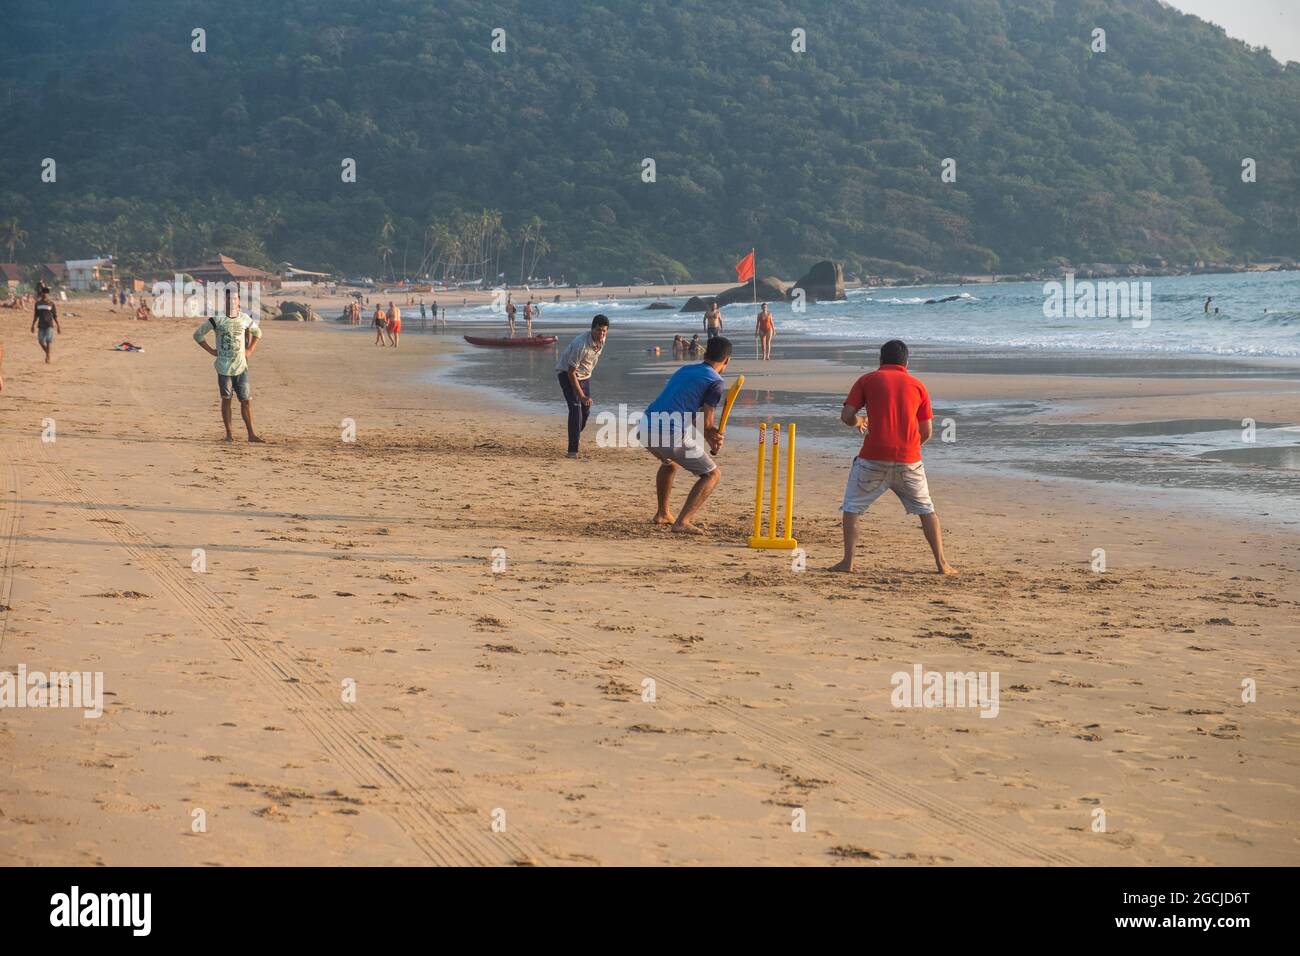 Group of Indian adults playing cricket on beach at sunset, Goa, India Stock Photo